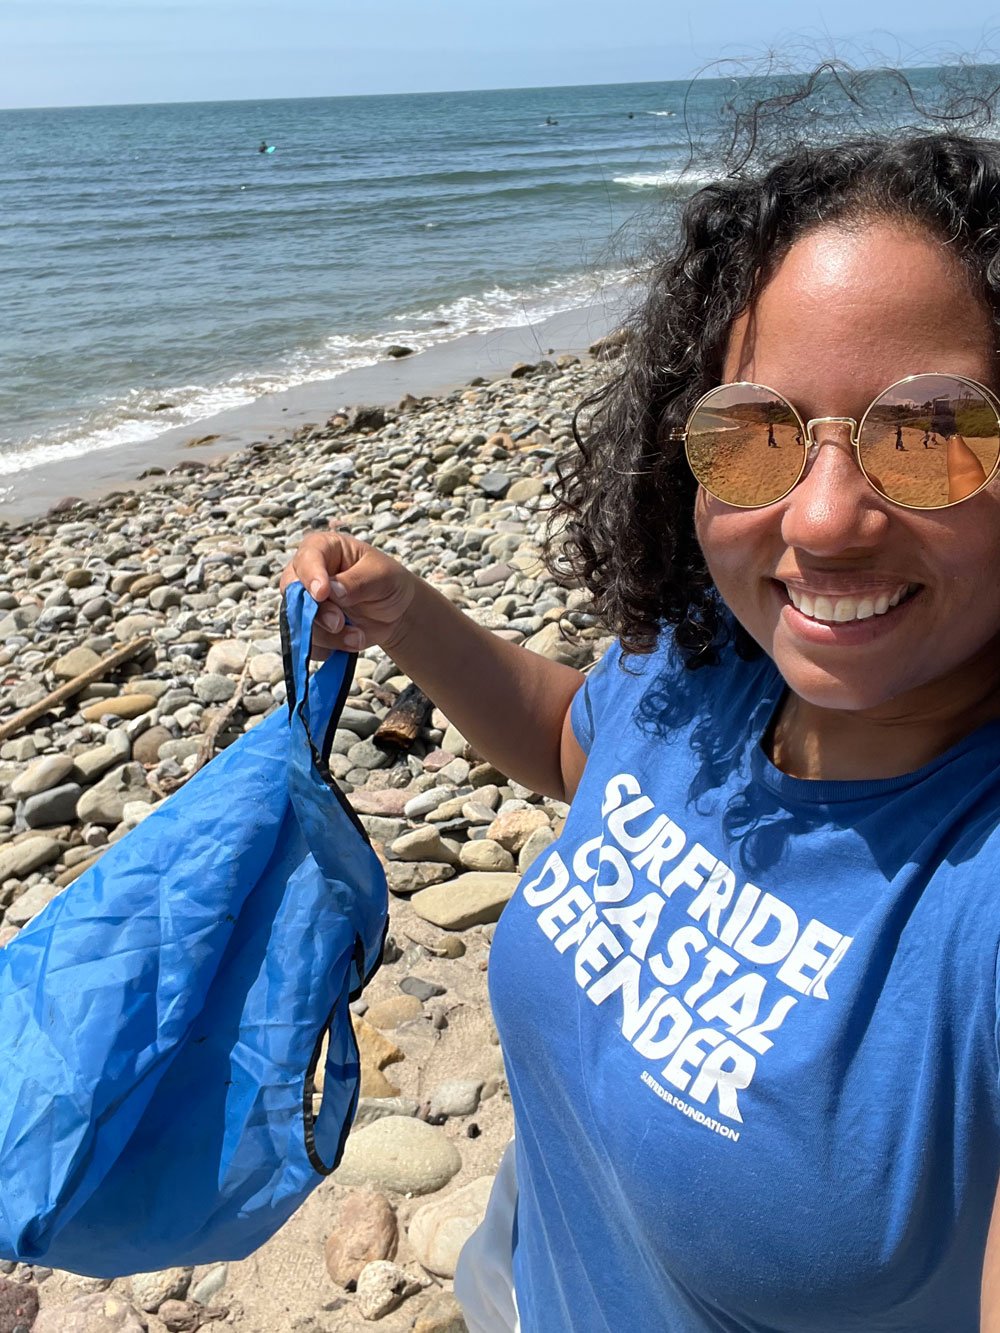 Andrika Payne with the Los Angeles Chapter picking up trash at the beach